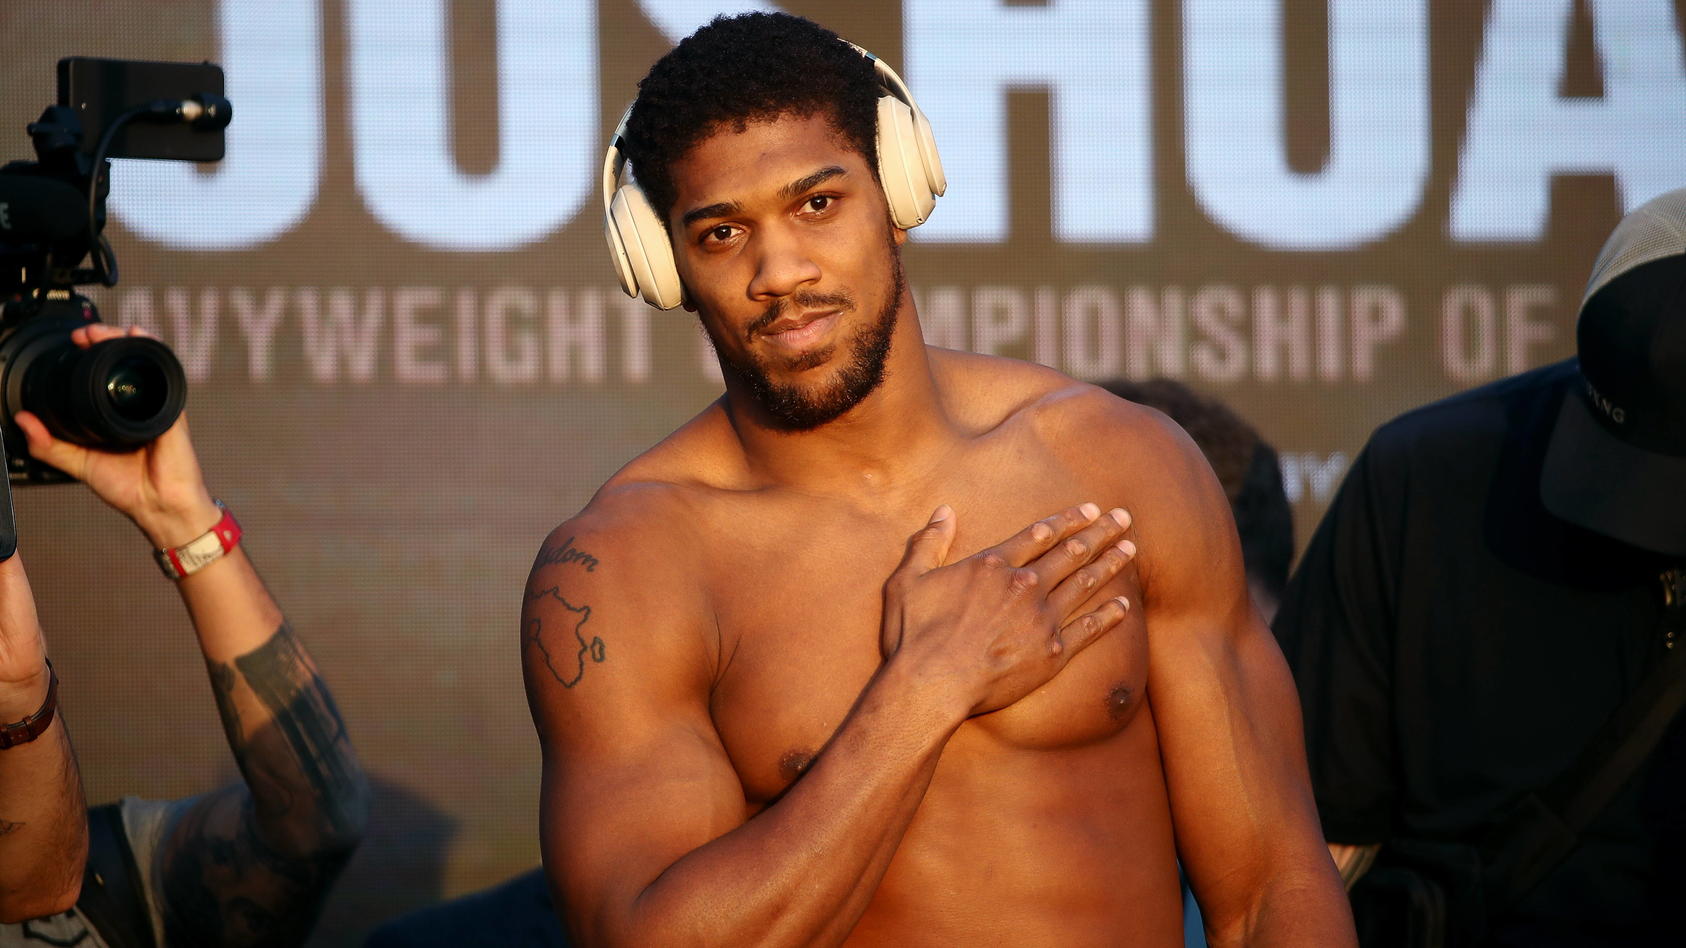 RIYADH, SAUDI ARABIA - DECEMBER 6, 2019: British boxer Anthony Joshua during a weigh-in ceremony on the eve of his bout